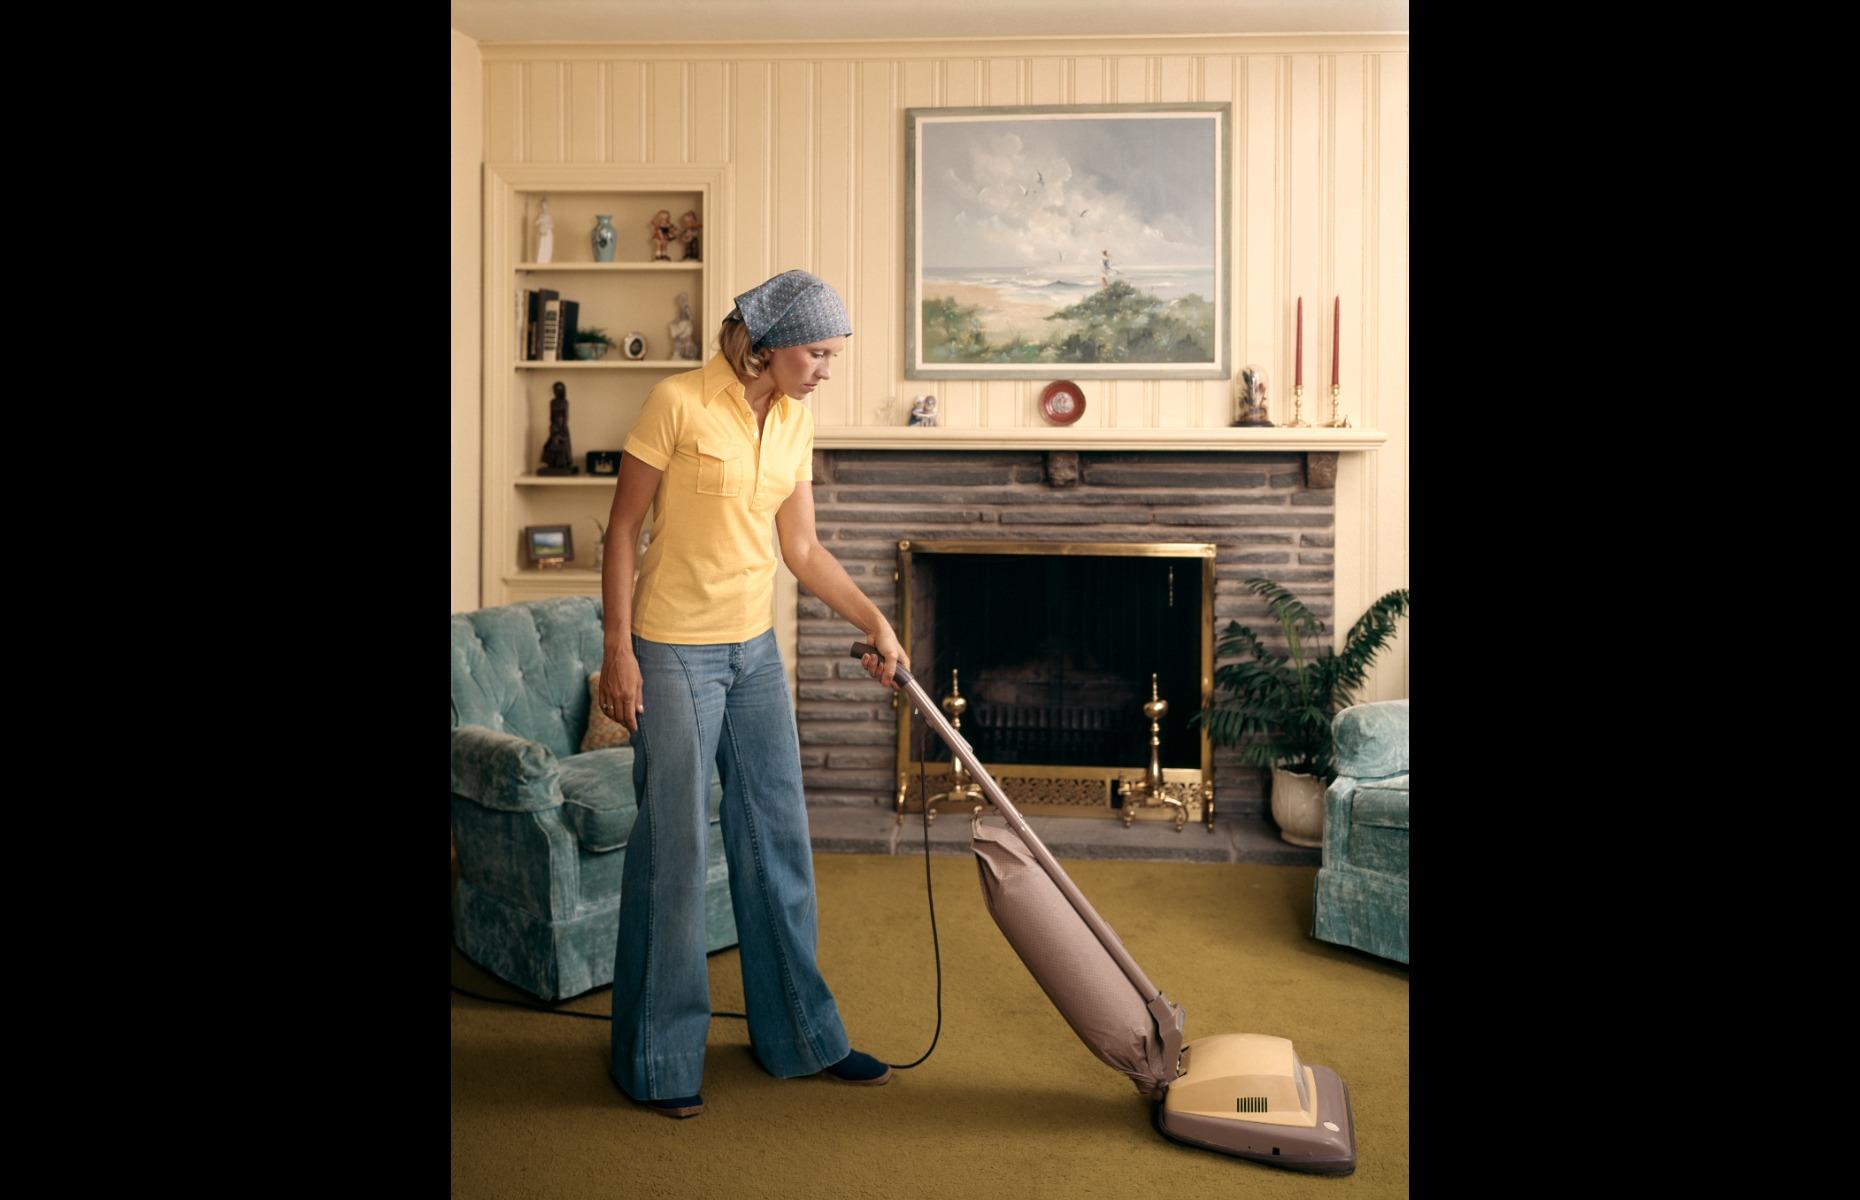 Vacuum cleaners: became widely affordable in the 1970s